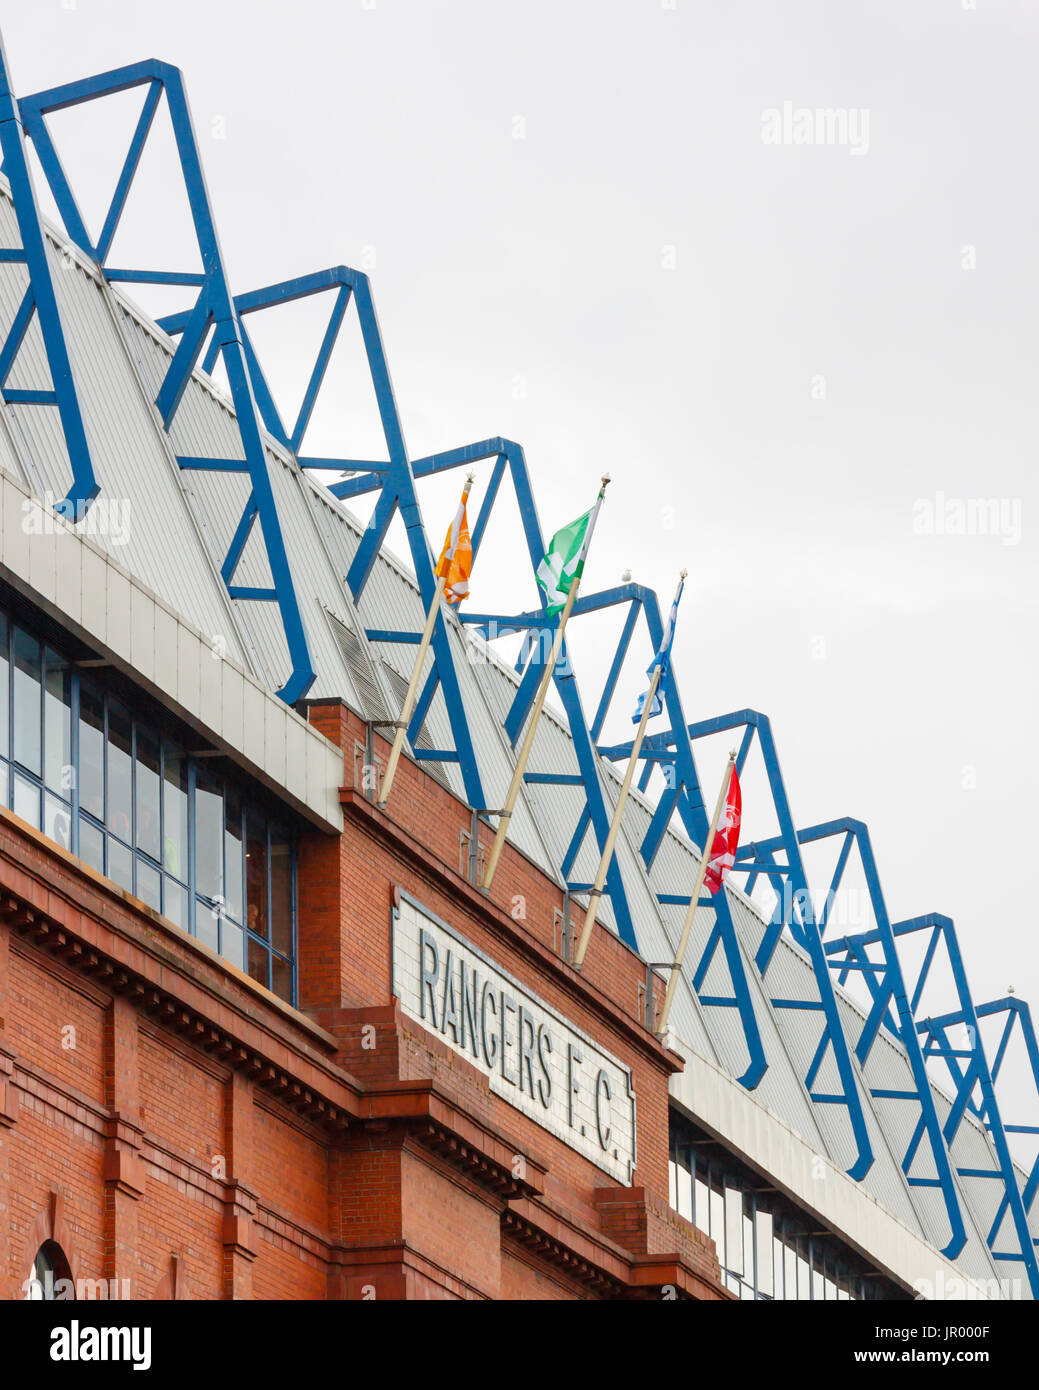 The Bill Struth Main Stand at Ibrox Stadium, home of Glasgow Rangers Football Club in Scotland. The stand is a category B listed building. Stock Photo